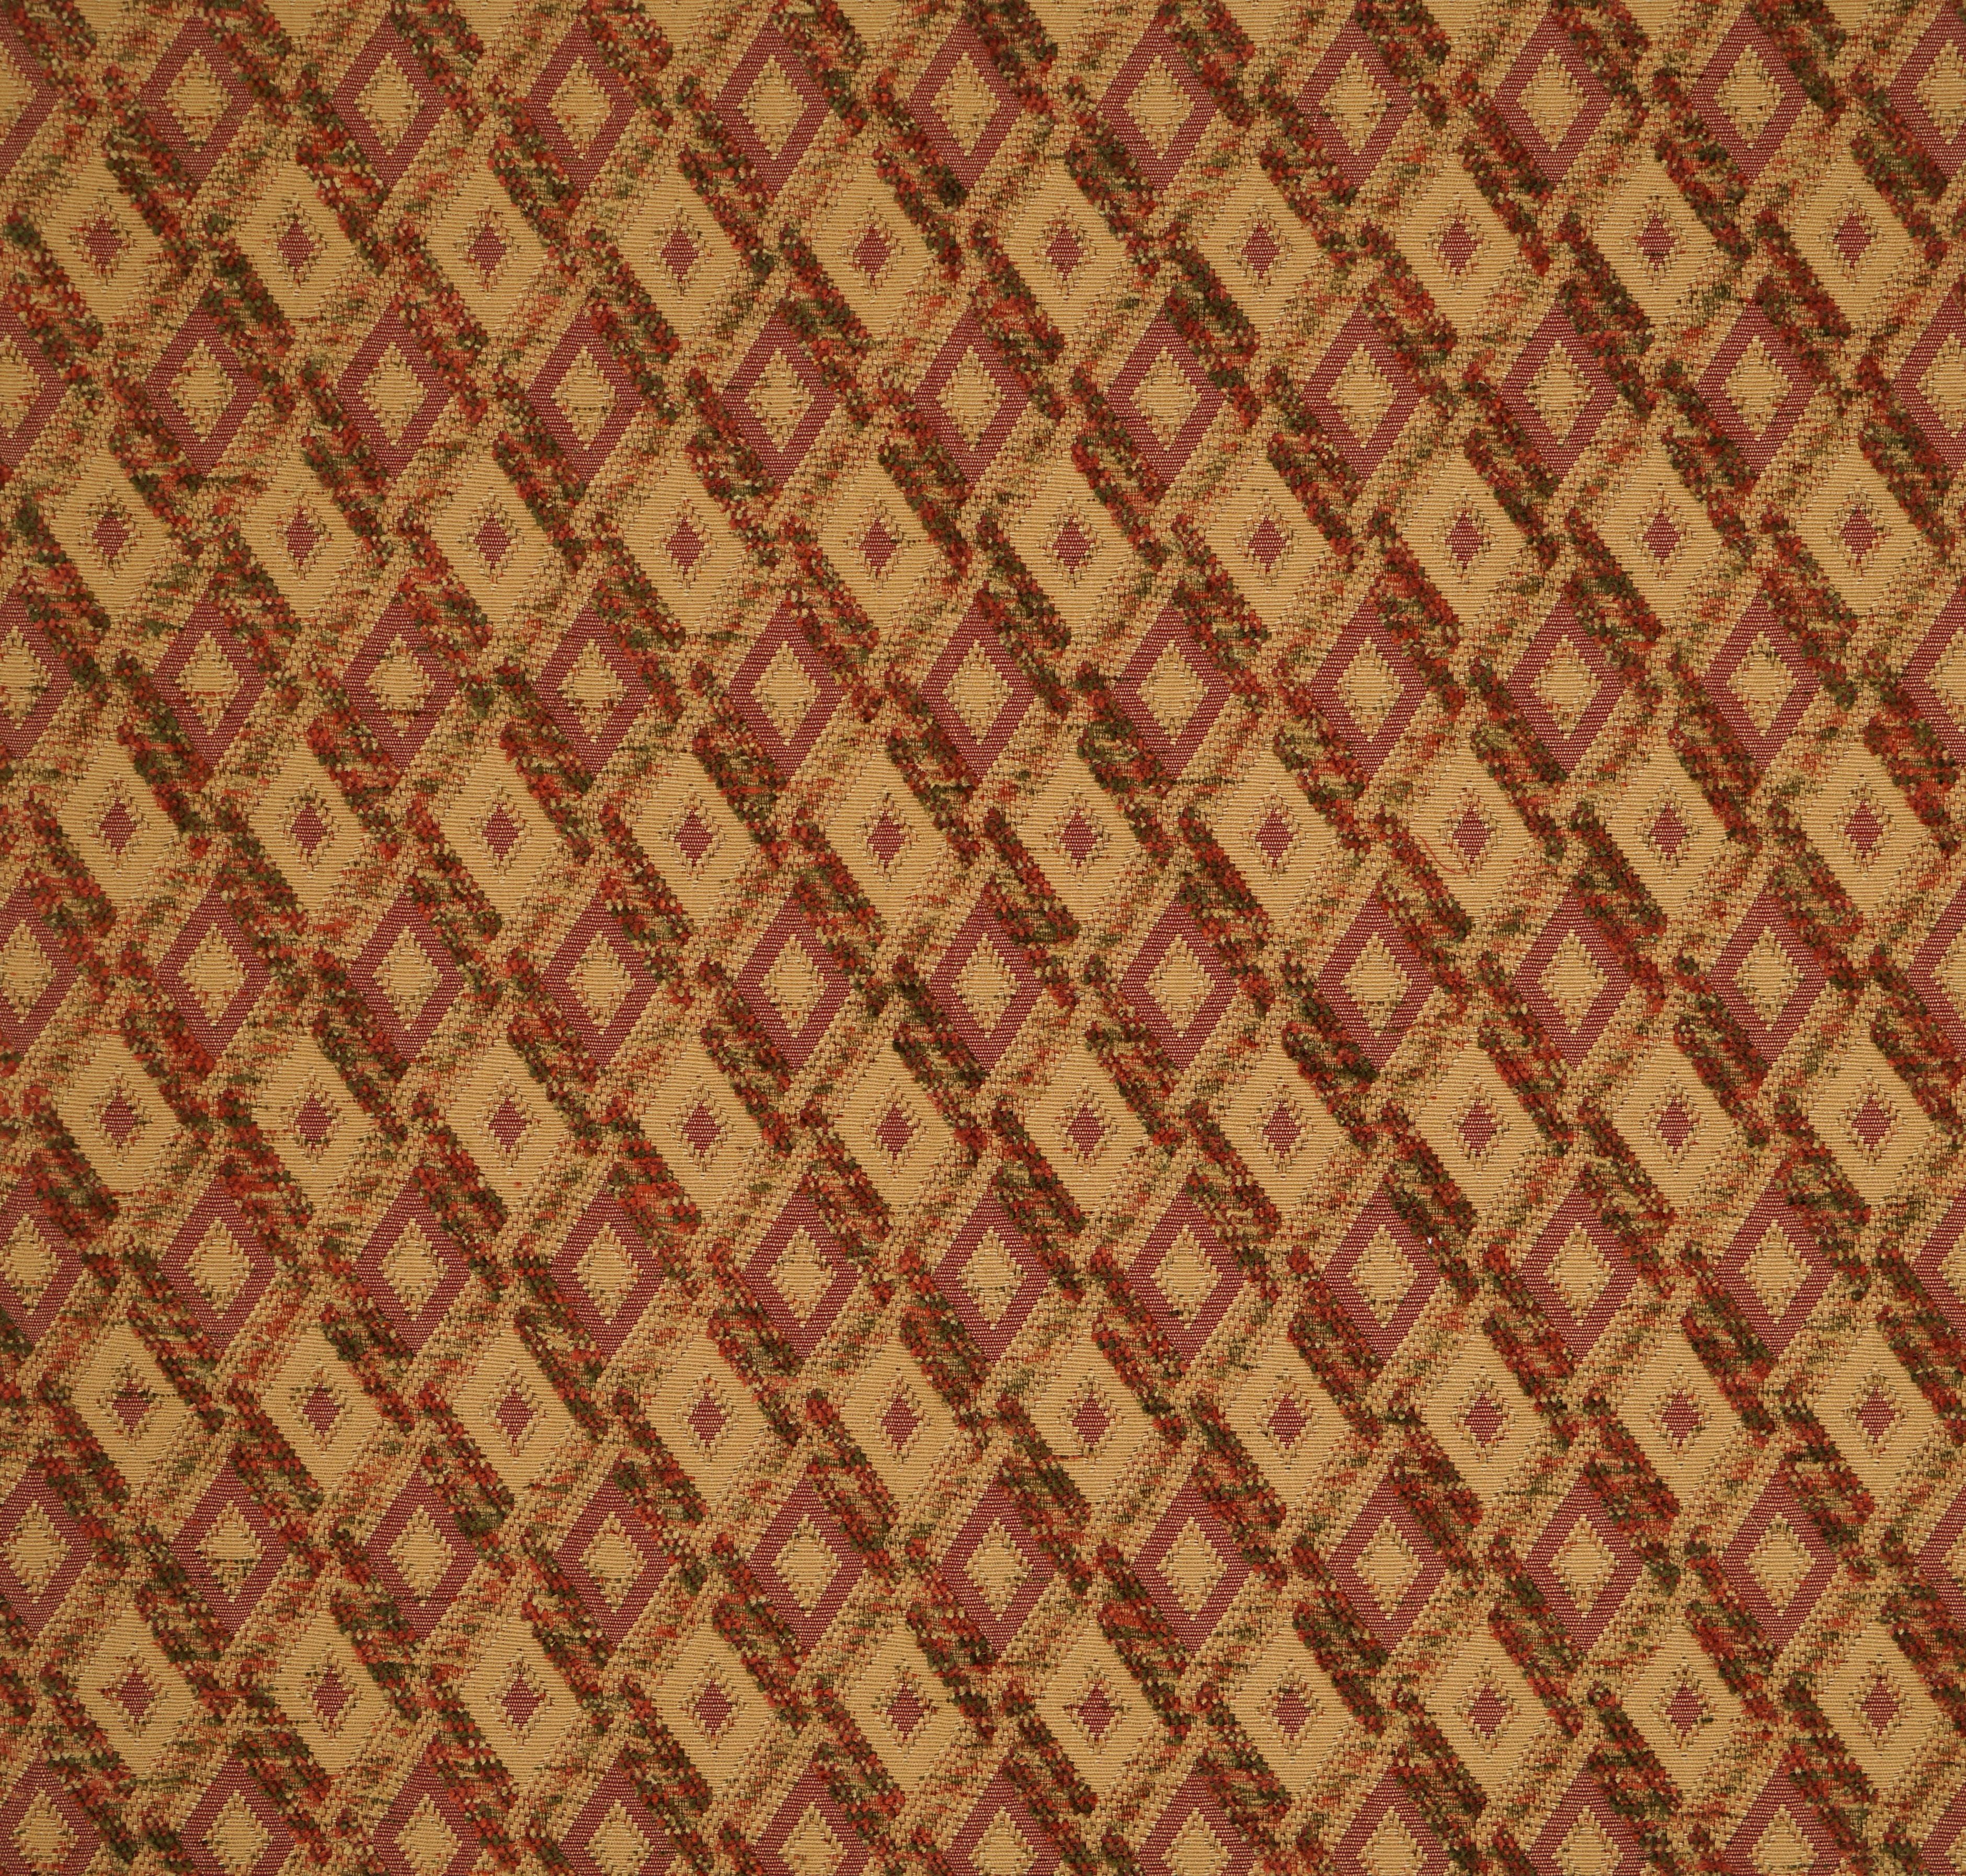 Gemma fabric in autumn cider color - pattern number JC 07254044 - by Scalamandre in the Old World Weavers collection